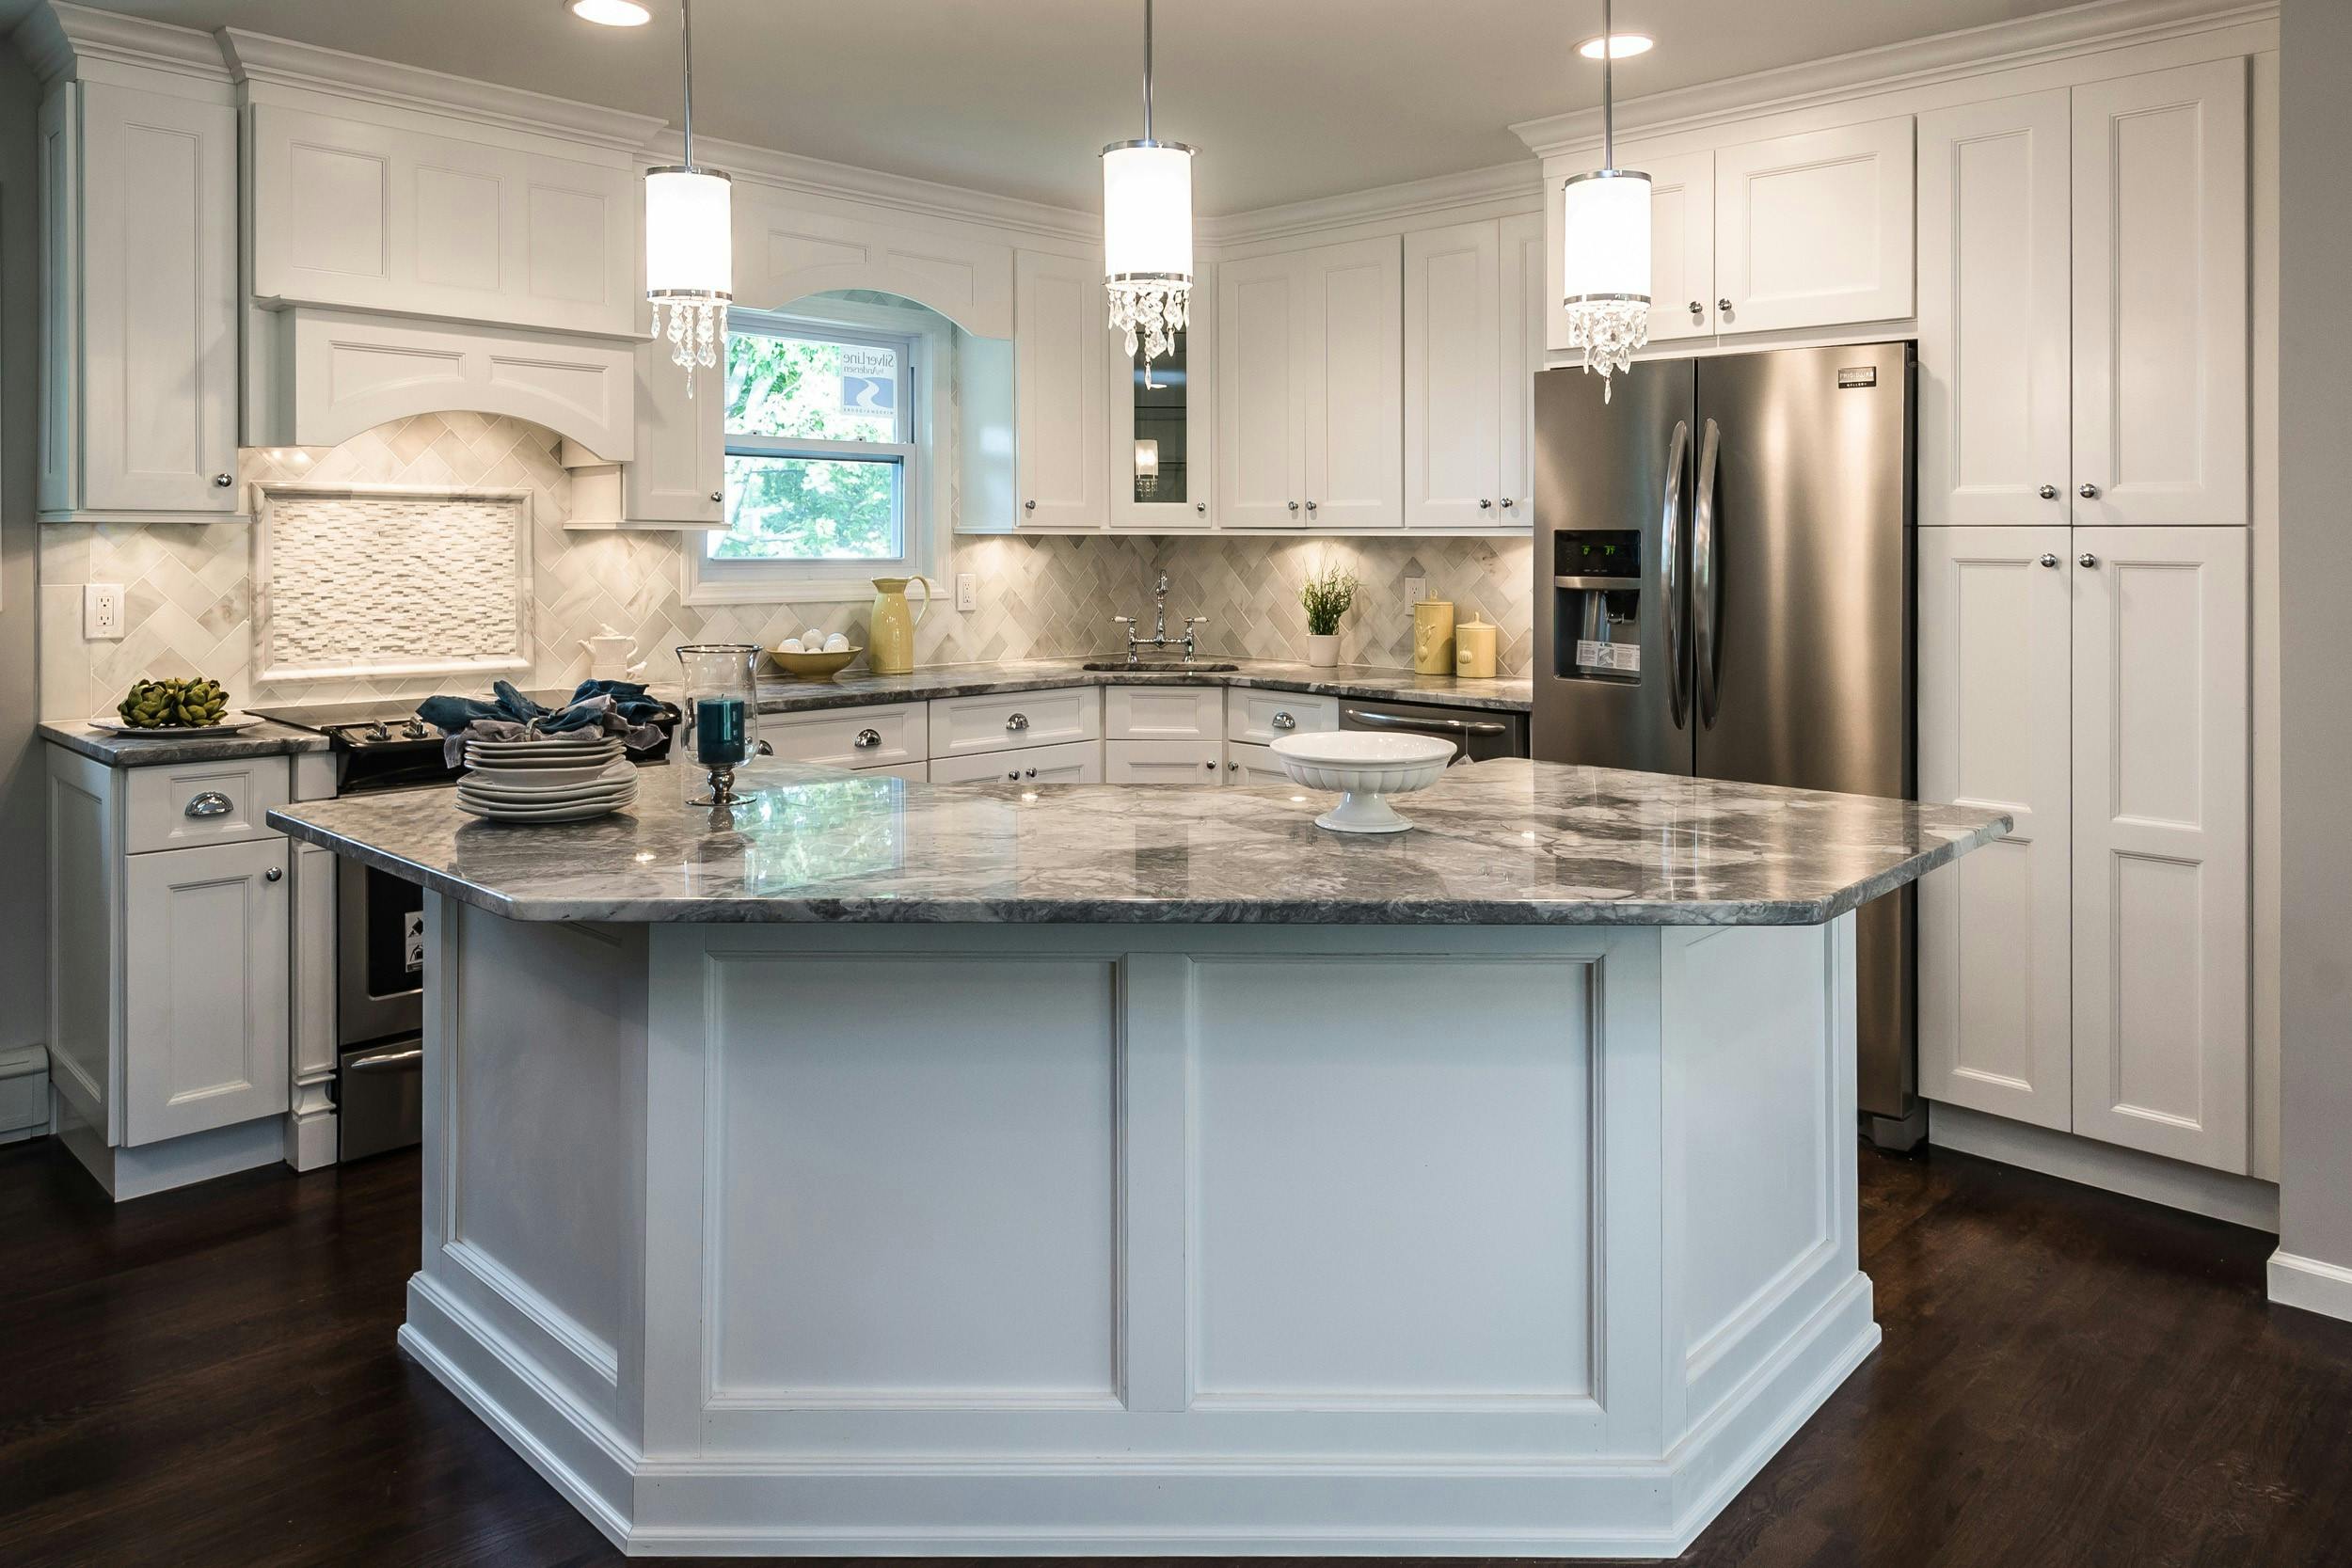 Kitchen Countertops And Cabinets, What Color Countertops Go Best With Gray Cabinets